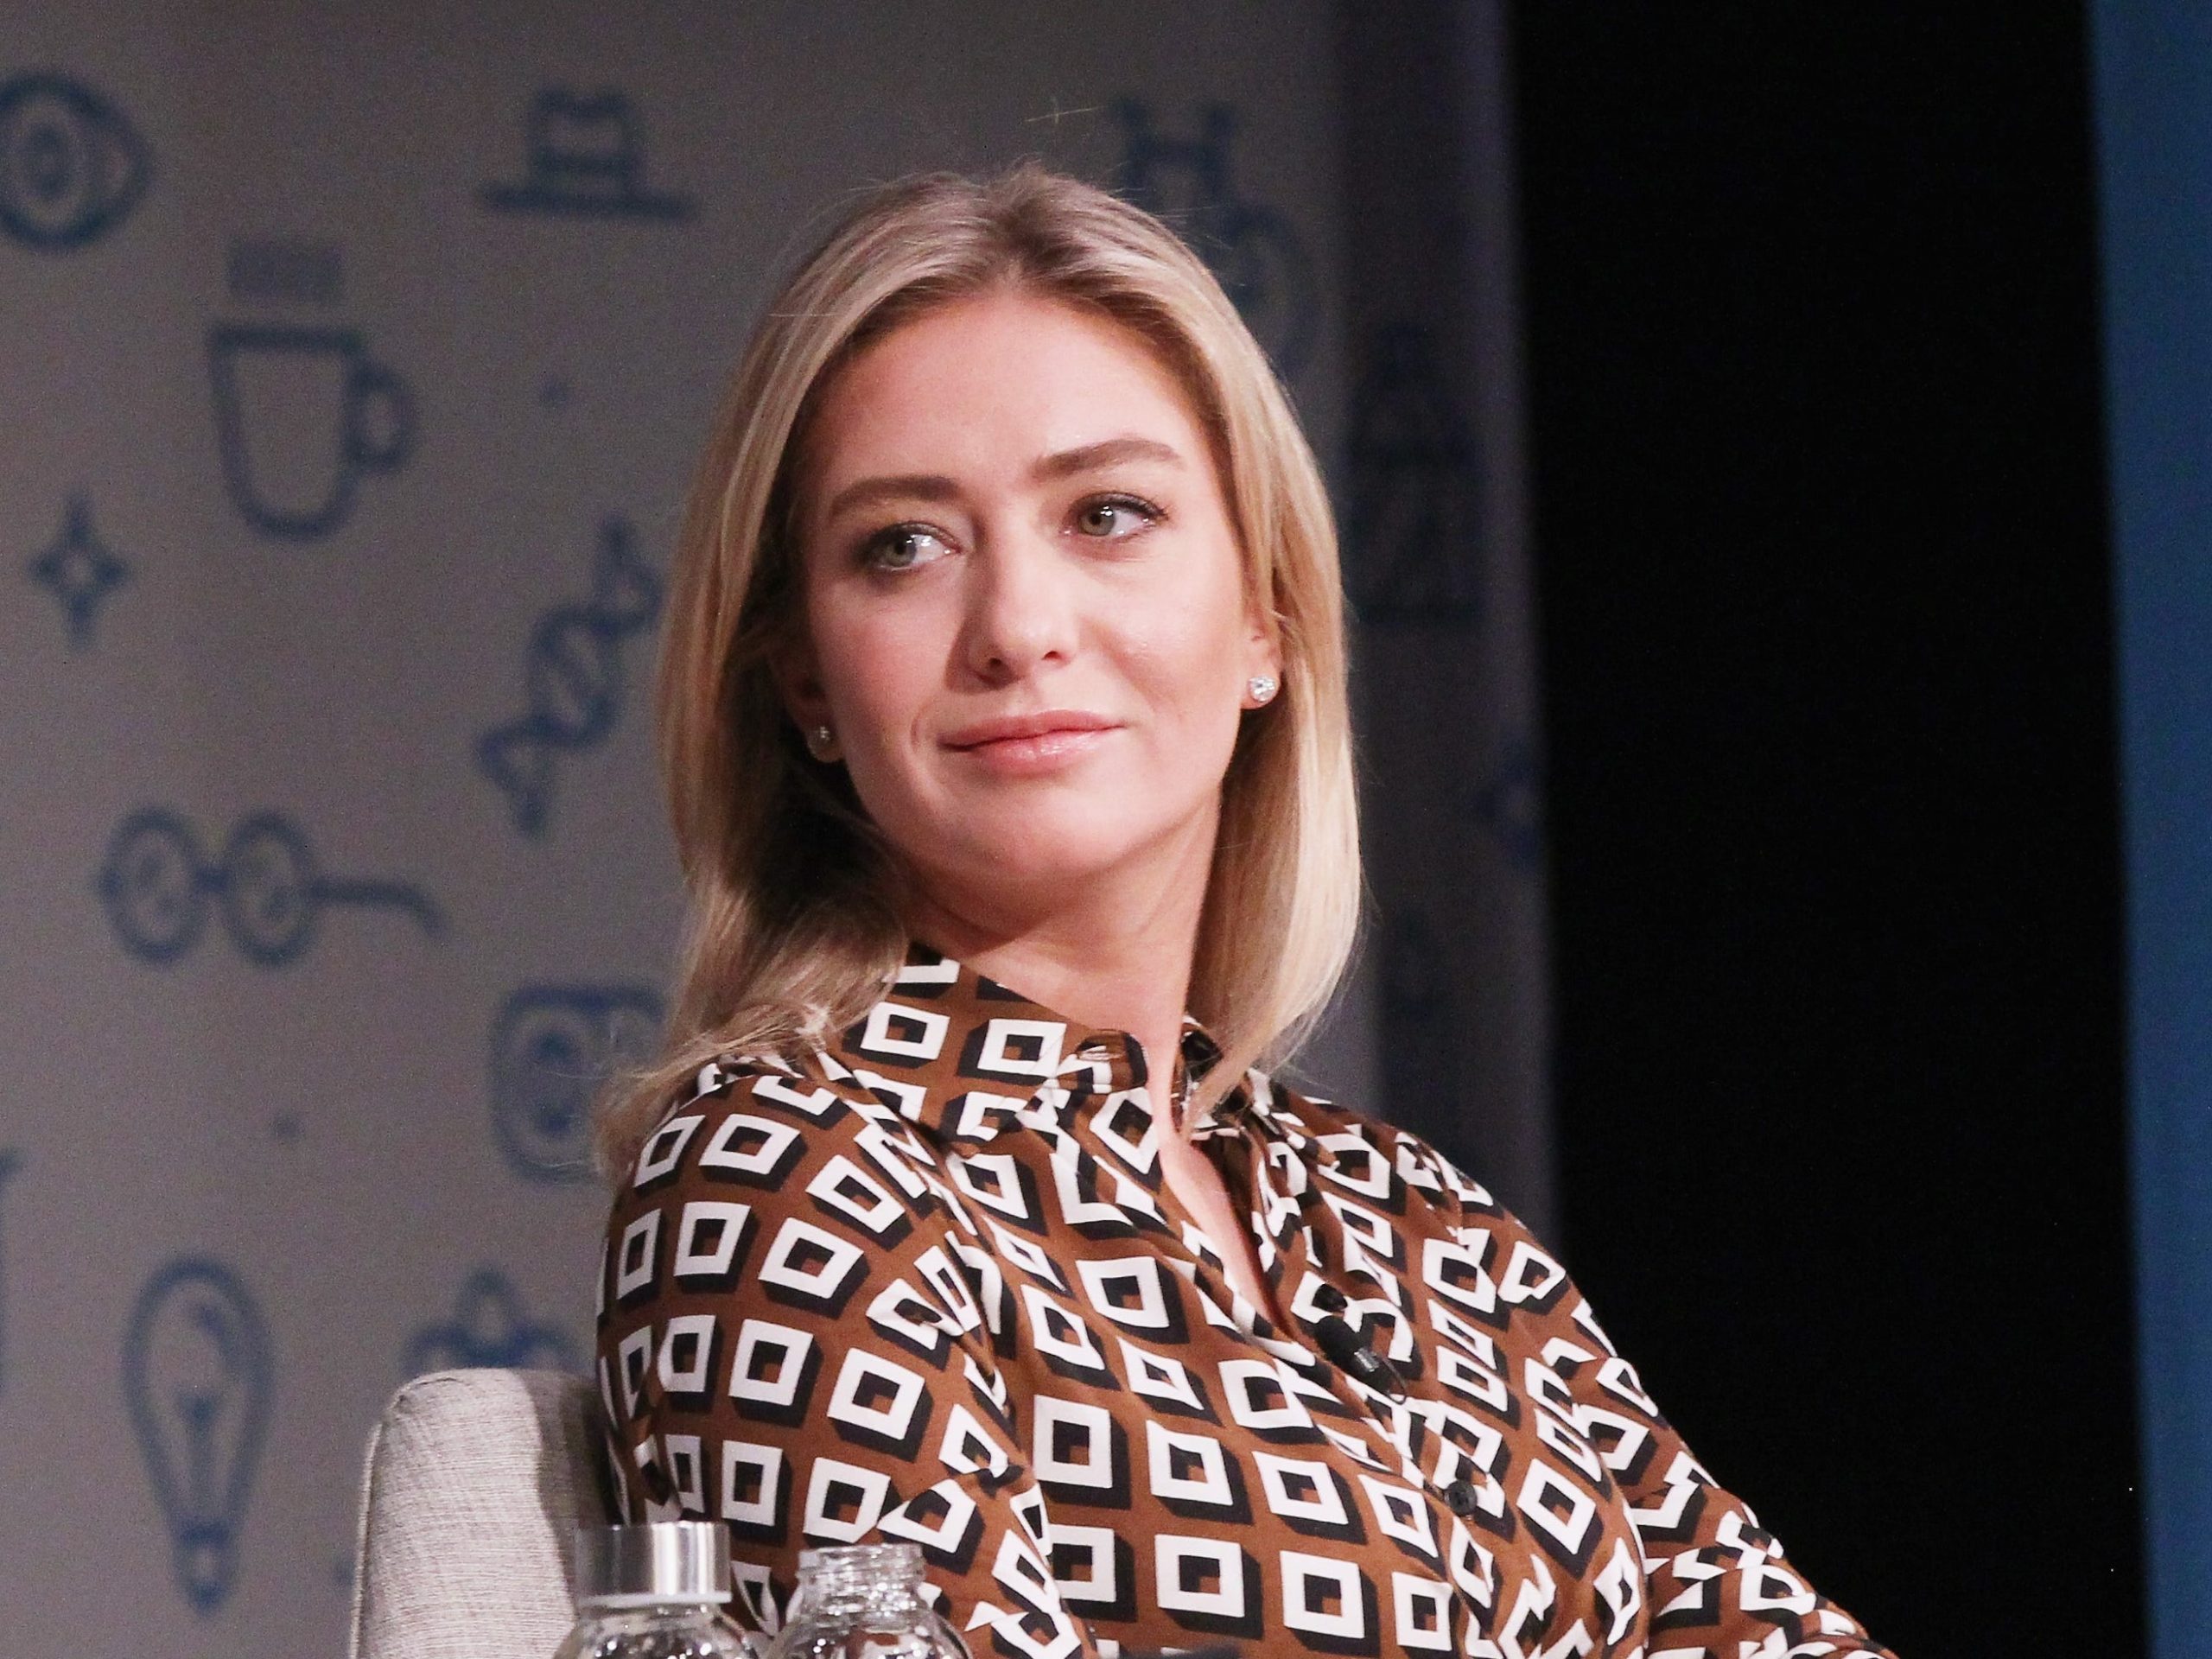 Whitney Wolfe Herd wears a brown and white dress while sitting on stage.